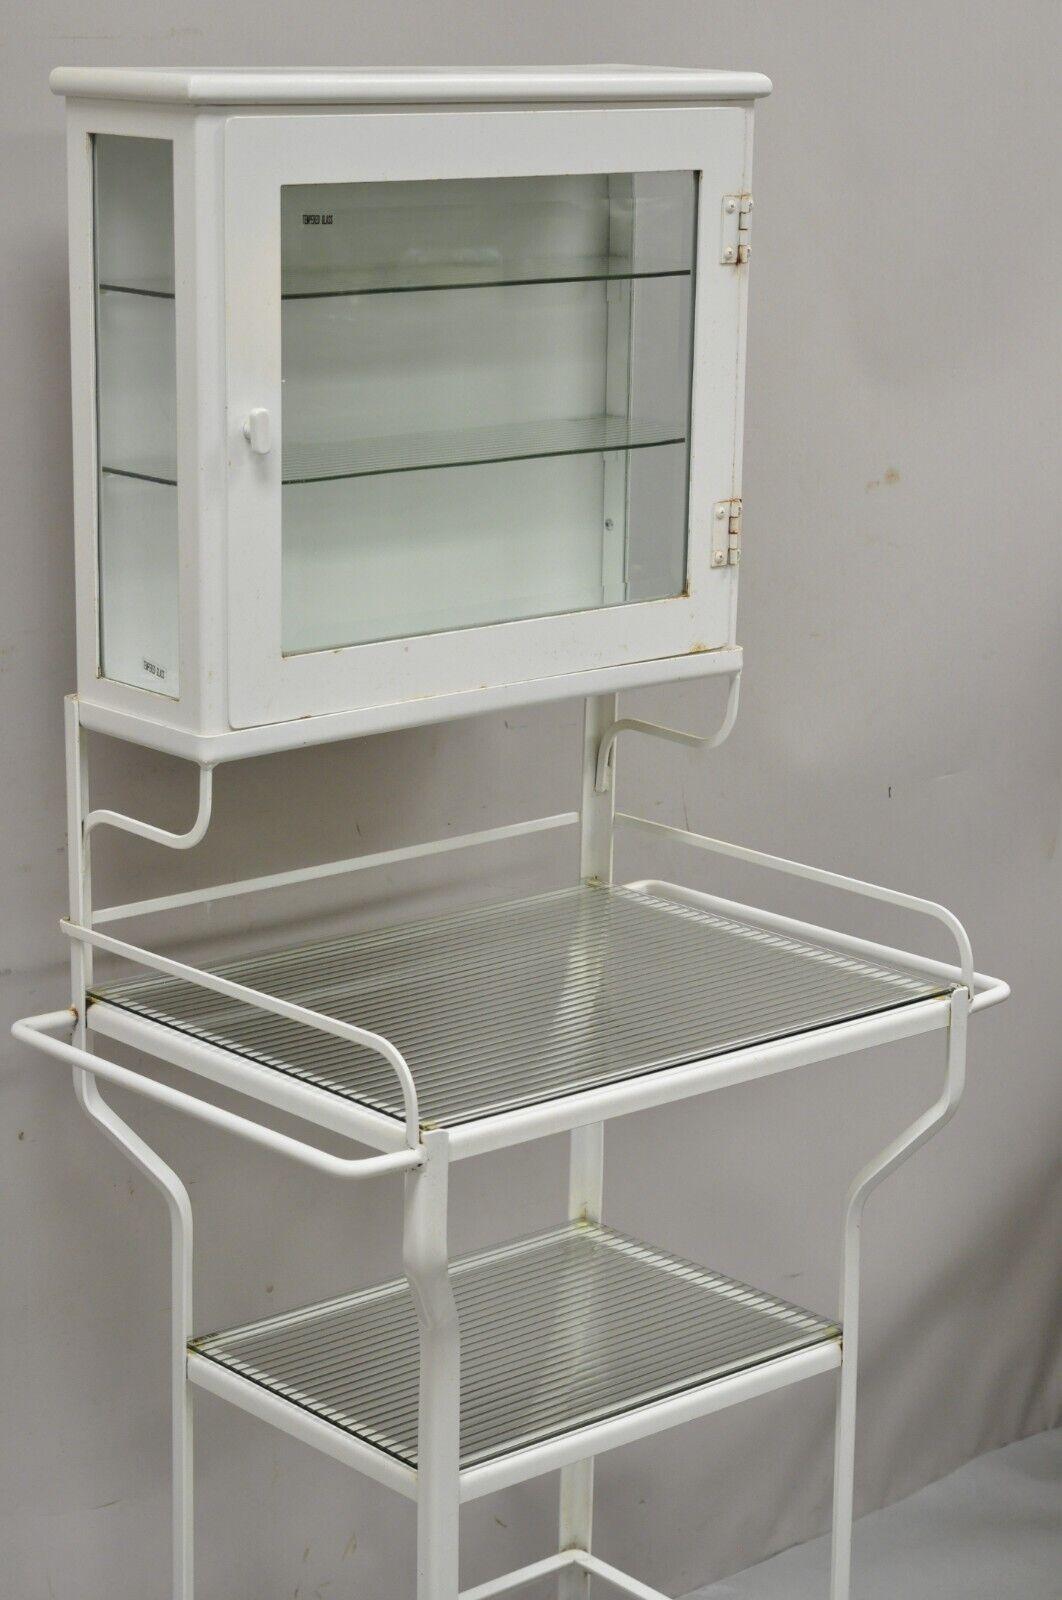 Retro Vintage Style Industrial Metal White Bathroom Cabinet Vanity Stand In Good Condition For Sale In Philadelphia, PA